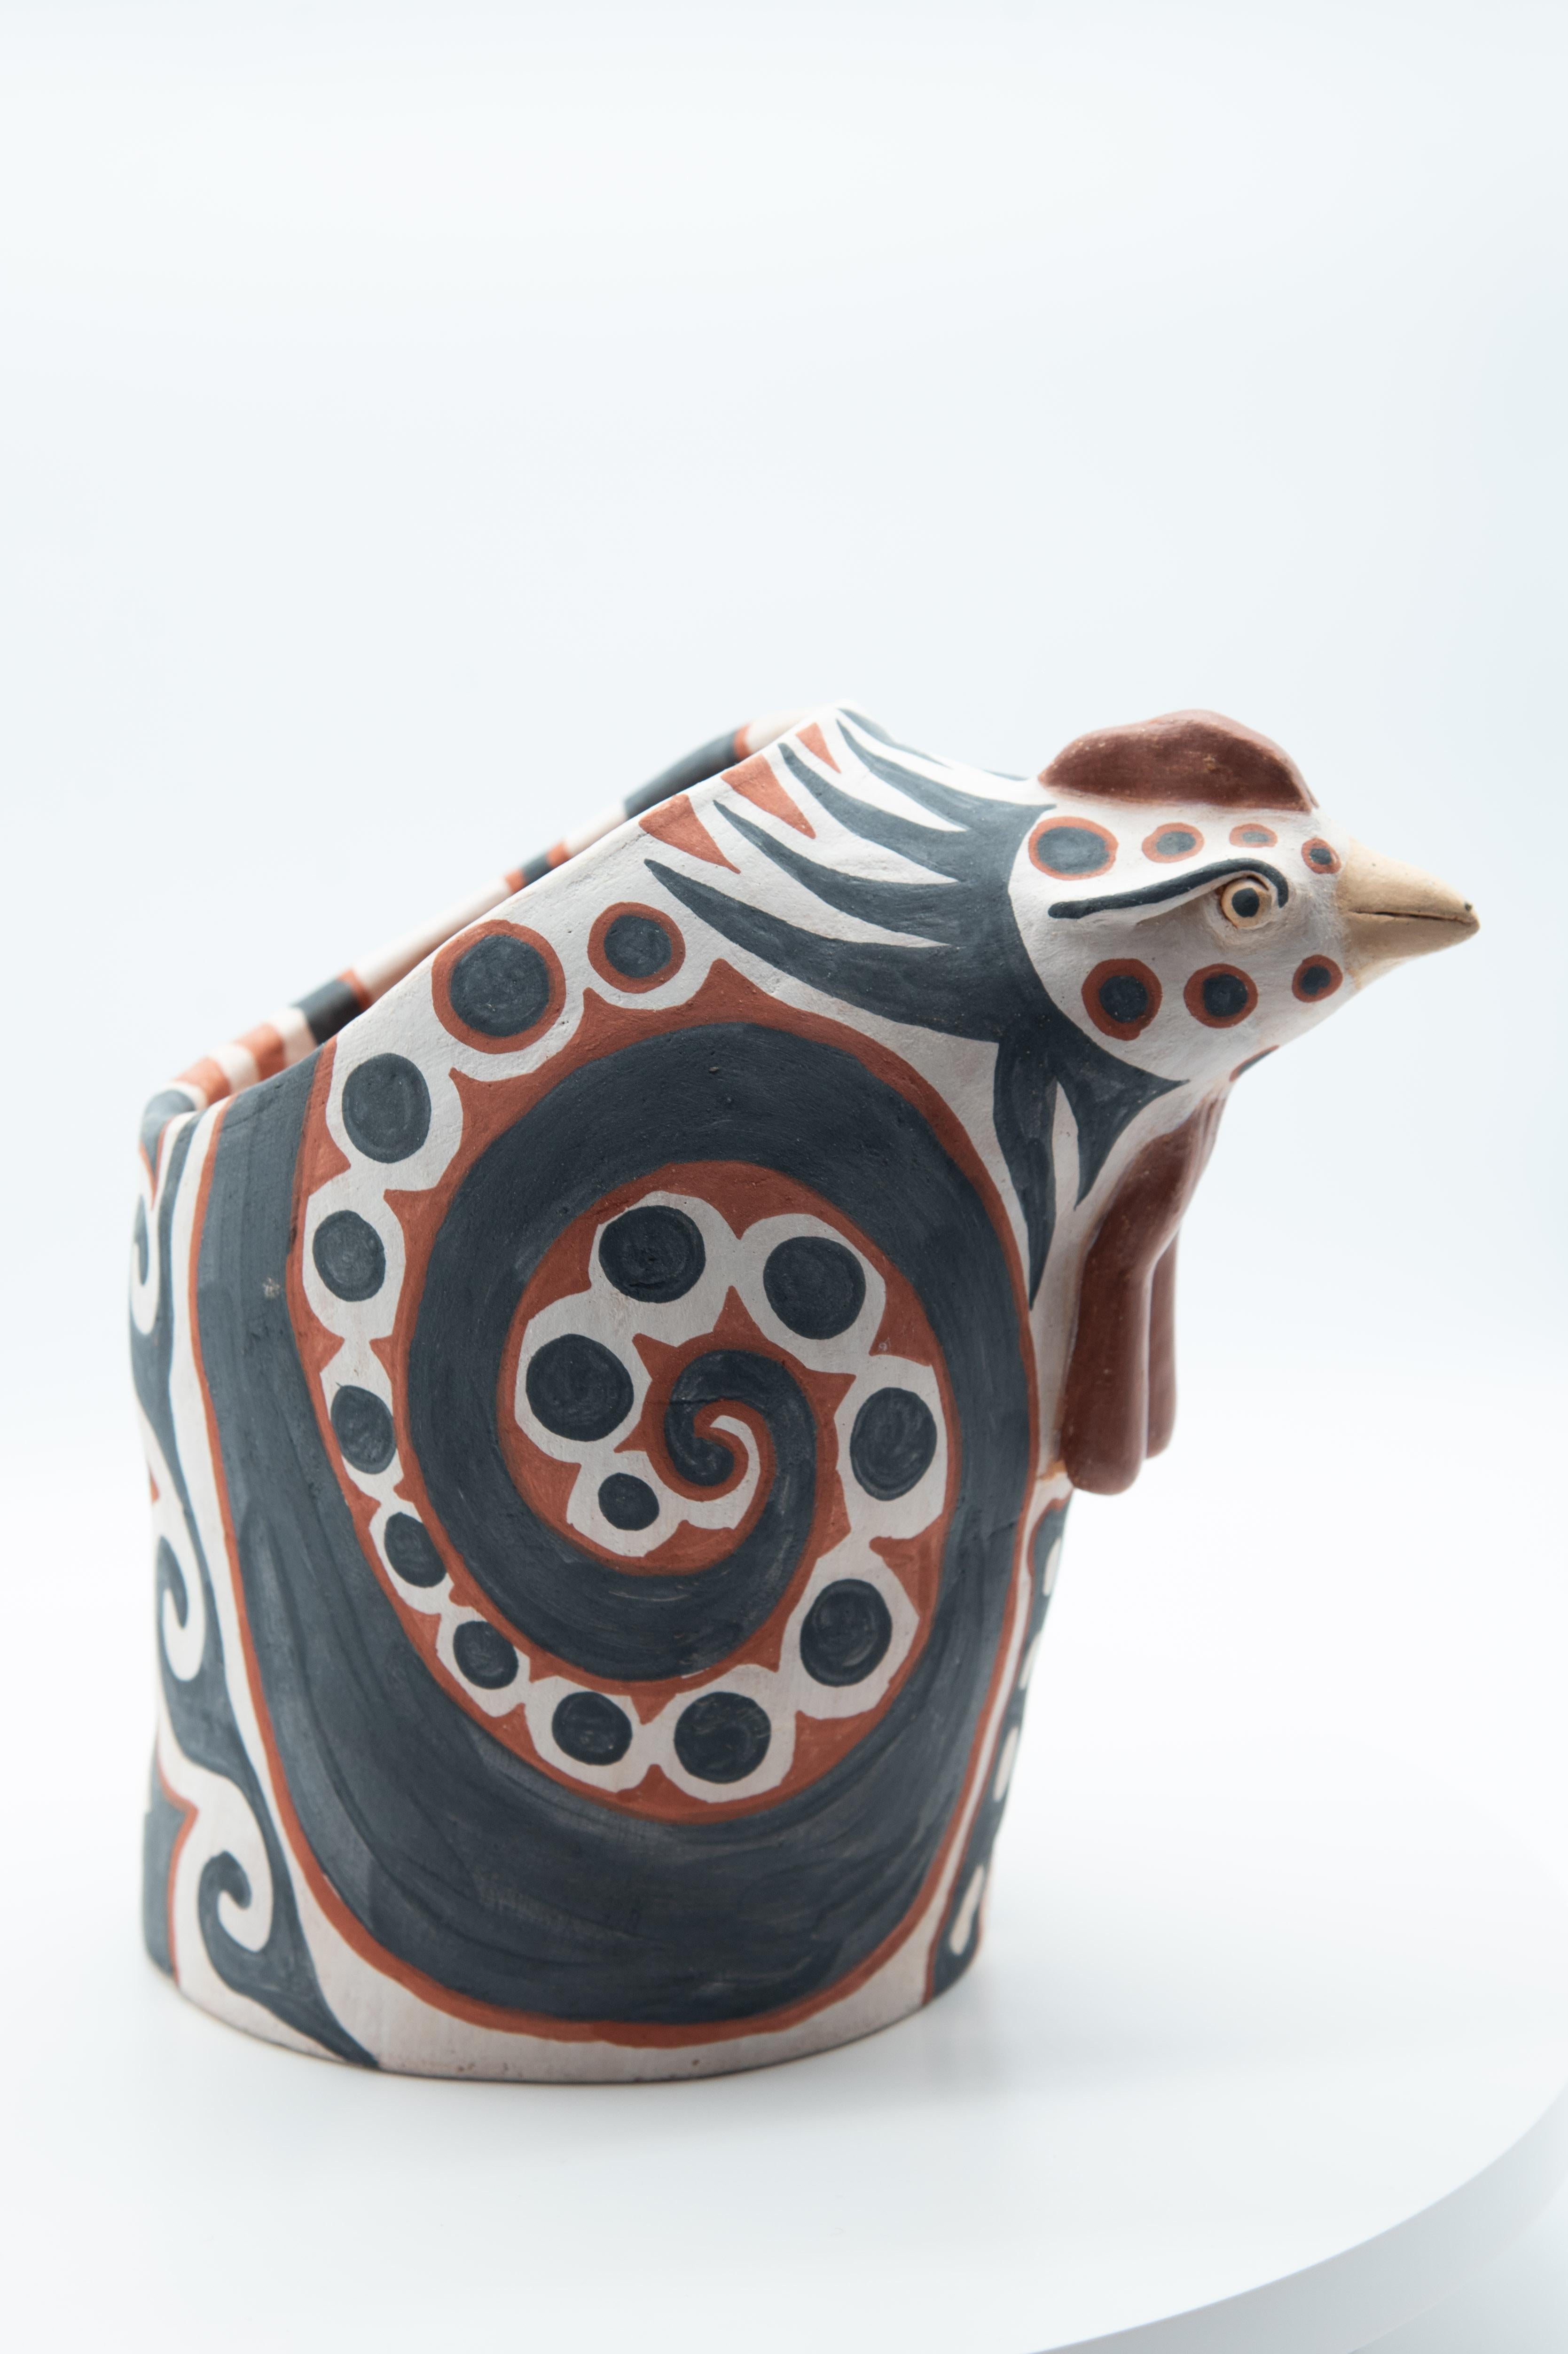 This Mexican ceramic hen is an egg basket, perfect to keep eggs fresh -- a utilitarian kitchen piece by artist Manuel Reyes. Made with clay from Oaxaca and Zacatecas, painted with oxides from the region. Done with the hand-modeled technique and